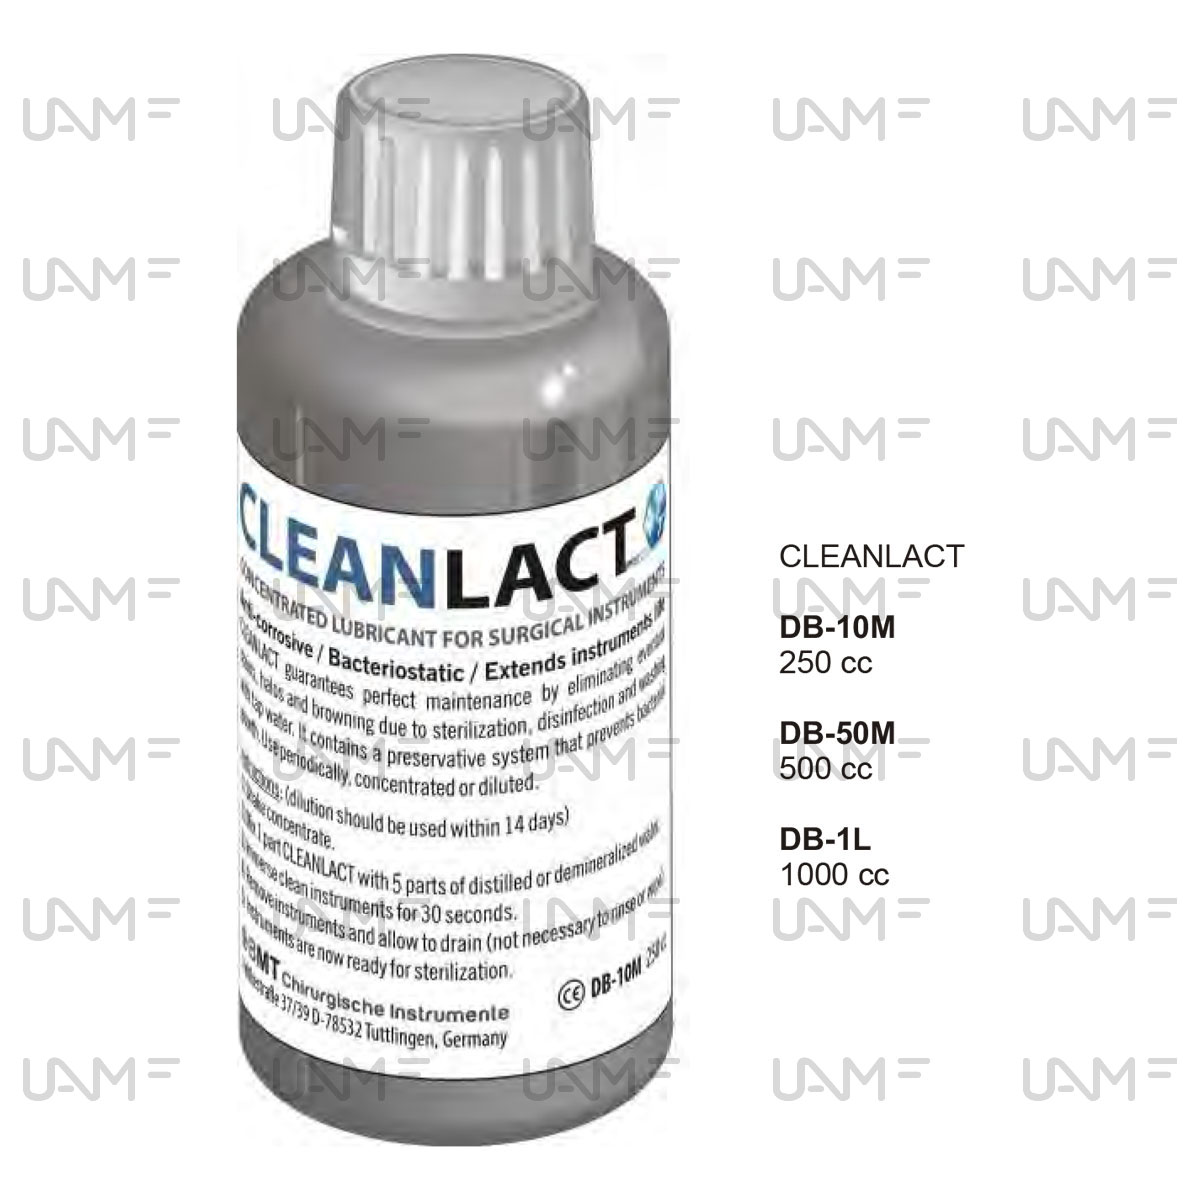 CLEANLACT Maintenance of instruments